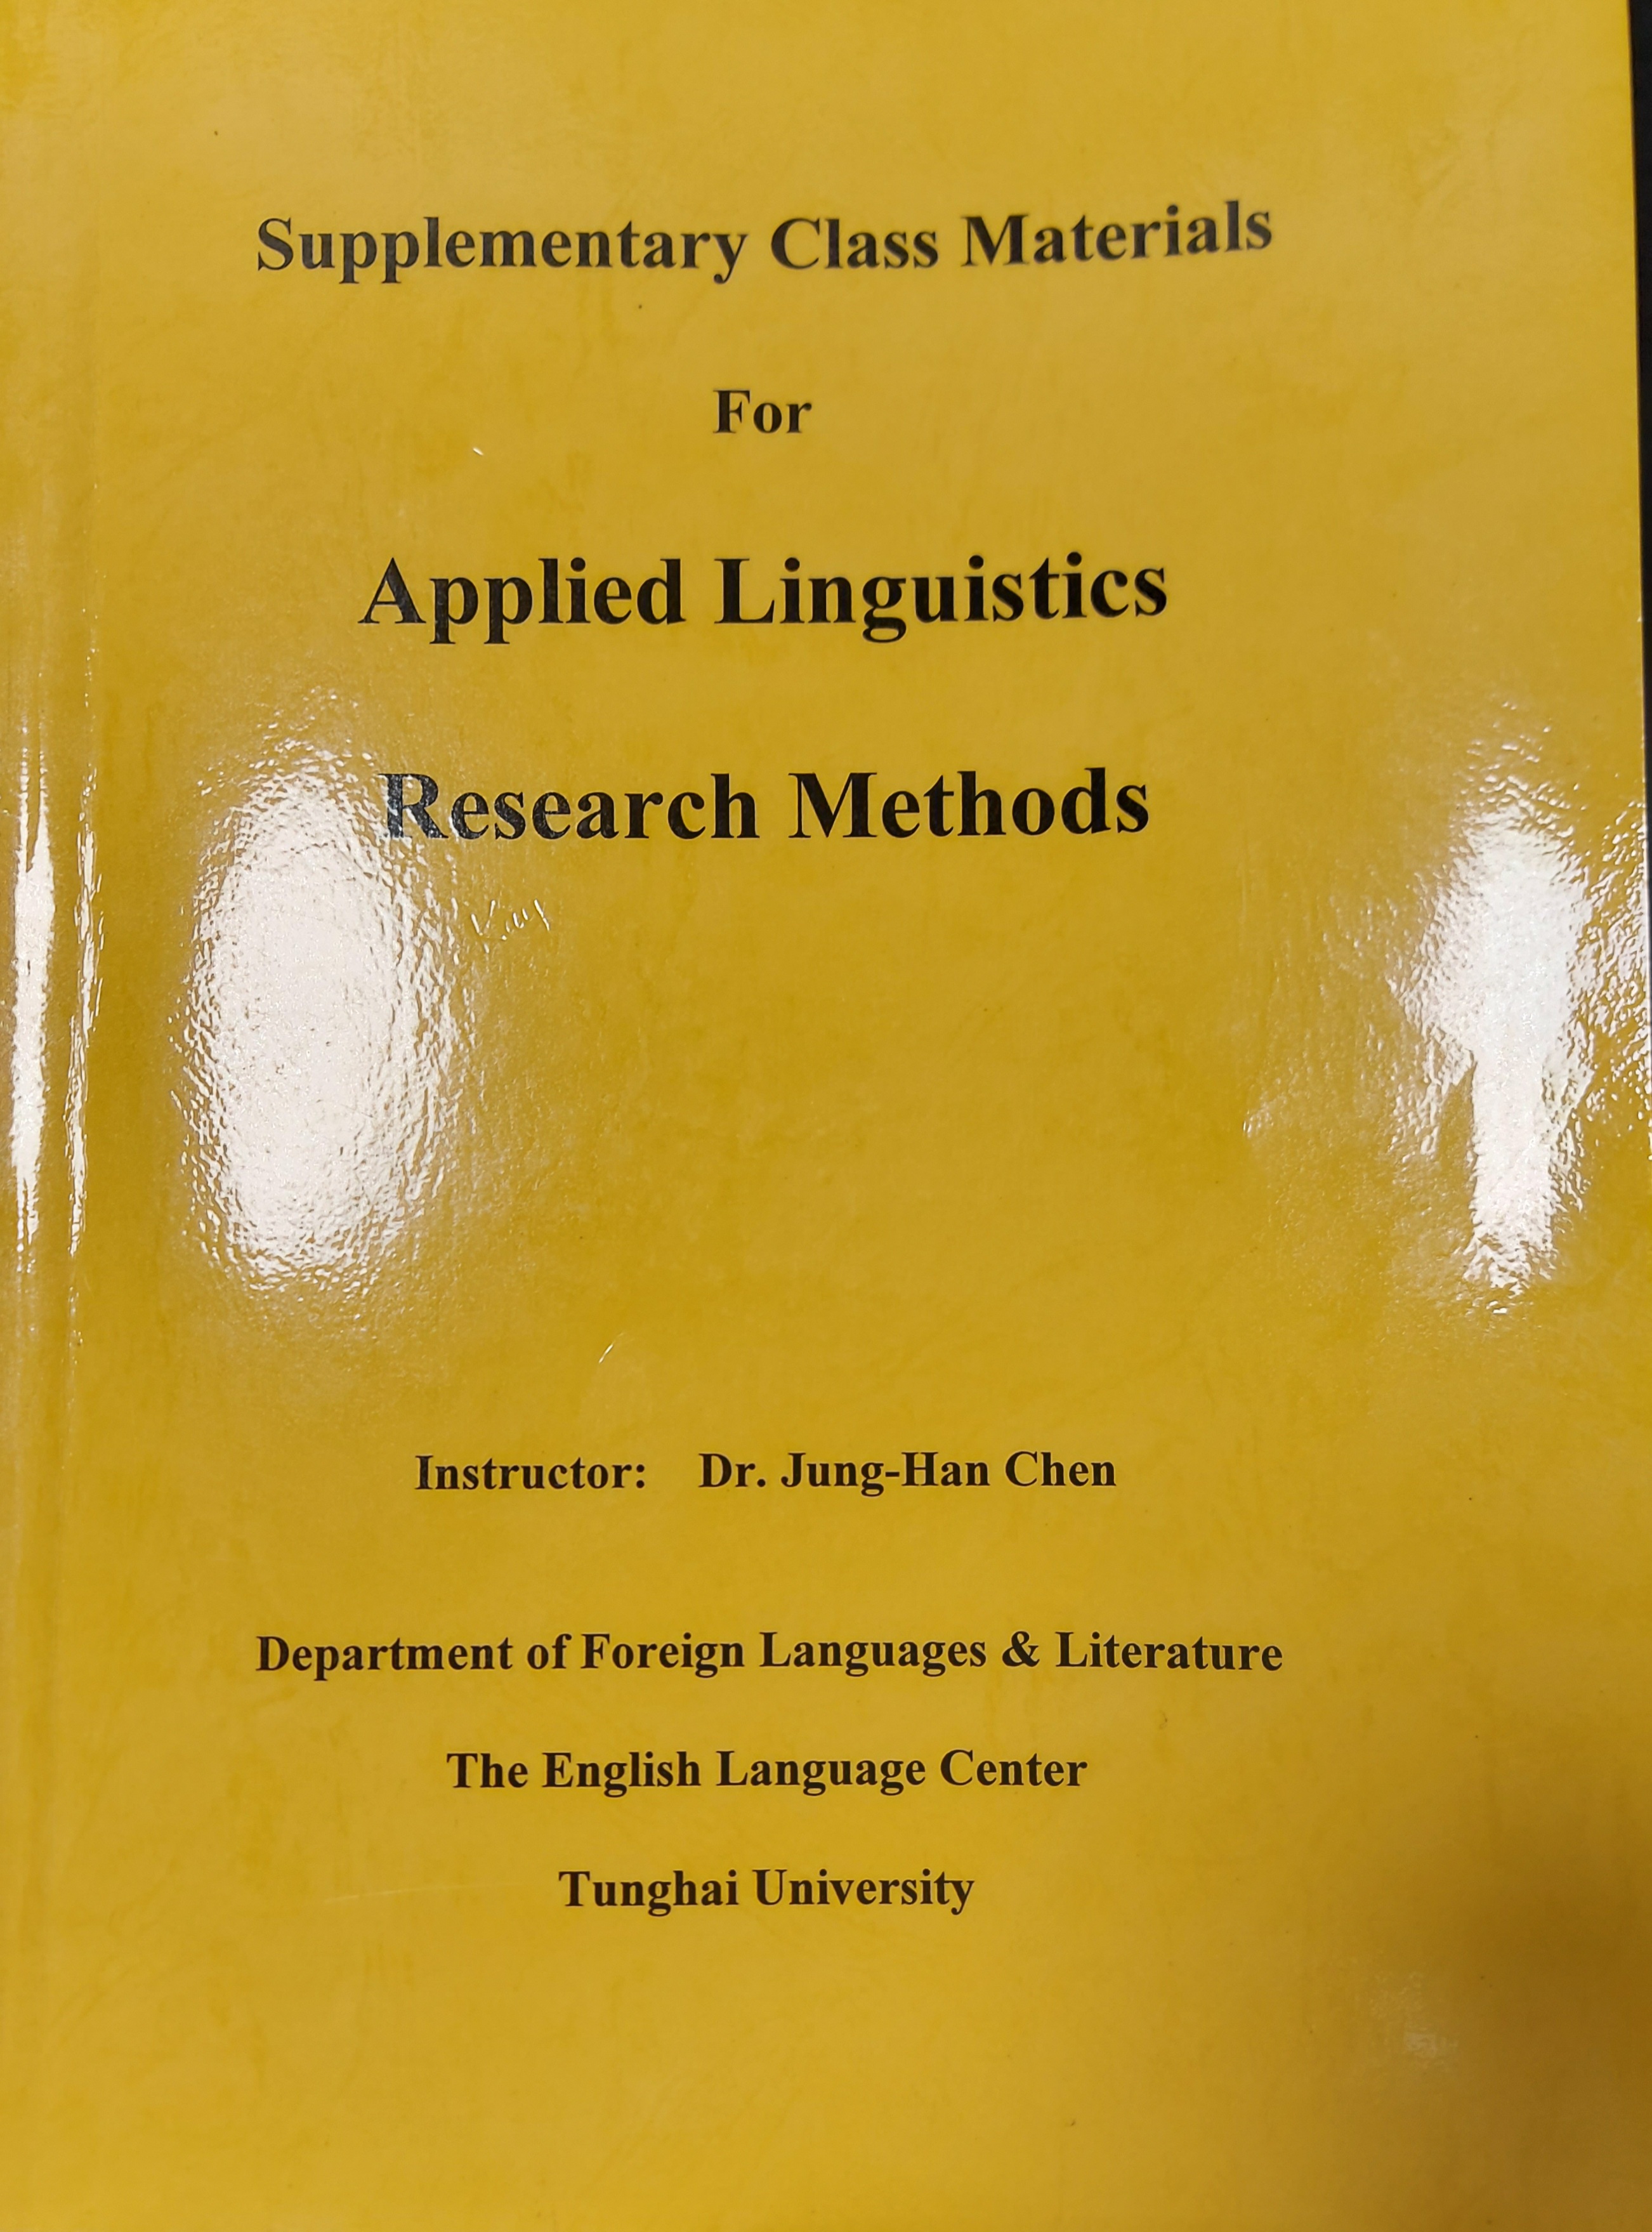 Supplementary Class Materials For Applied Linguistics Research Methods-講義版 詳細資料